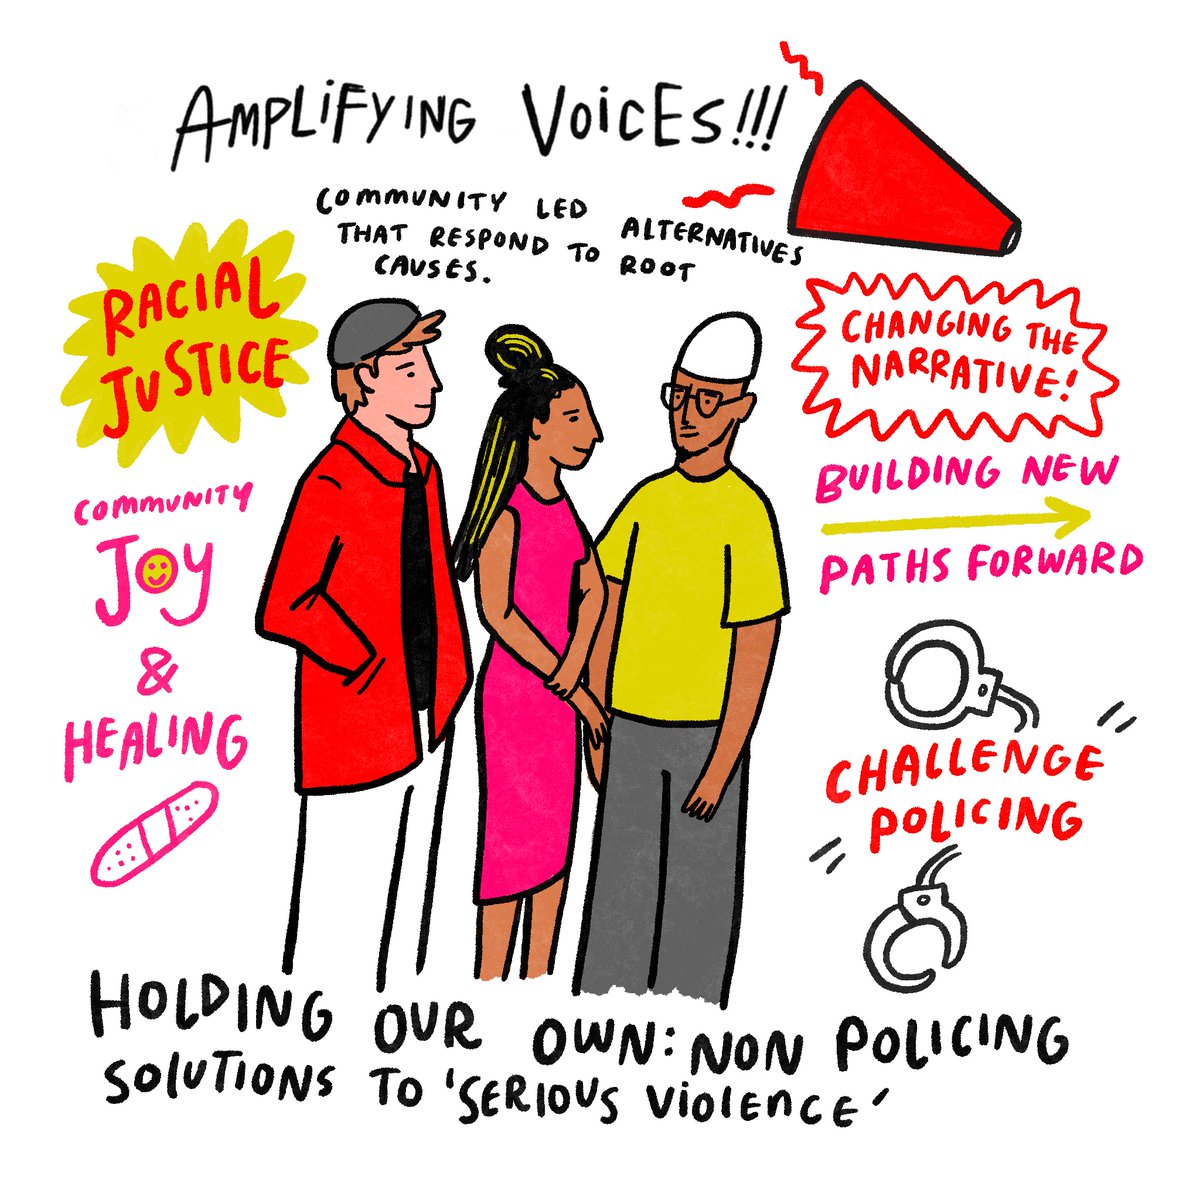 @katekearapelen @UAL @csm_news @VivGroskop Winner of #AmplifyingVoices: Holding Our Own: non-policing solutions to ‘serious violence’. 🤩 @libertyhq